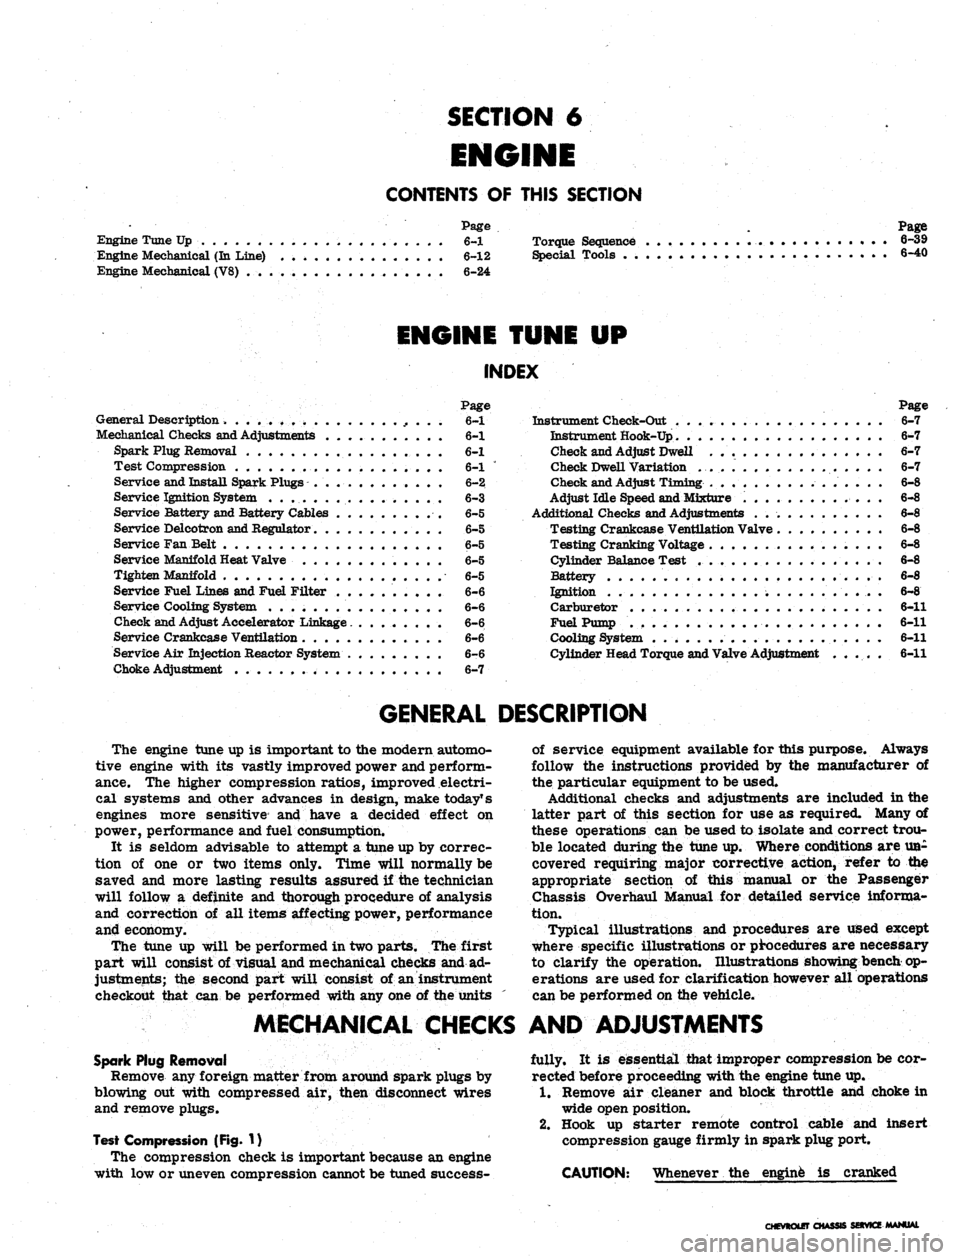 CHEVROLET CAMARO 1967 1.G Chassis Workshop Manual 
SECTION 6

ENGINE

CONTENTS
 OF
 THIS SECTION

Page

Engine Tune Up
 6-1
 Torque Sequence

Engine Mechanical
 (In
 Line)
 6-12
 Special Tools
 . .

Engine Mechanical (V8)
 6-24 
Page

6-39

6-40

ENG